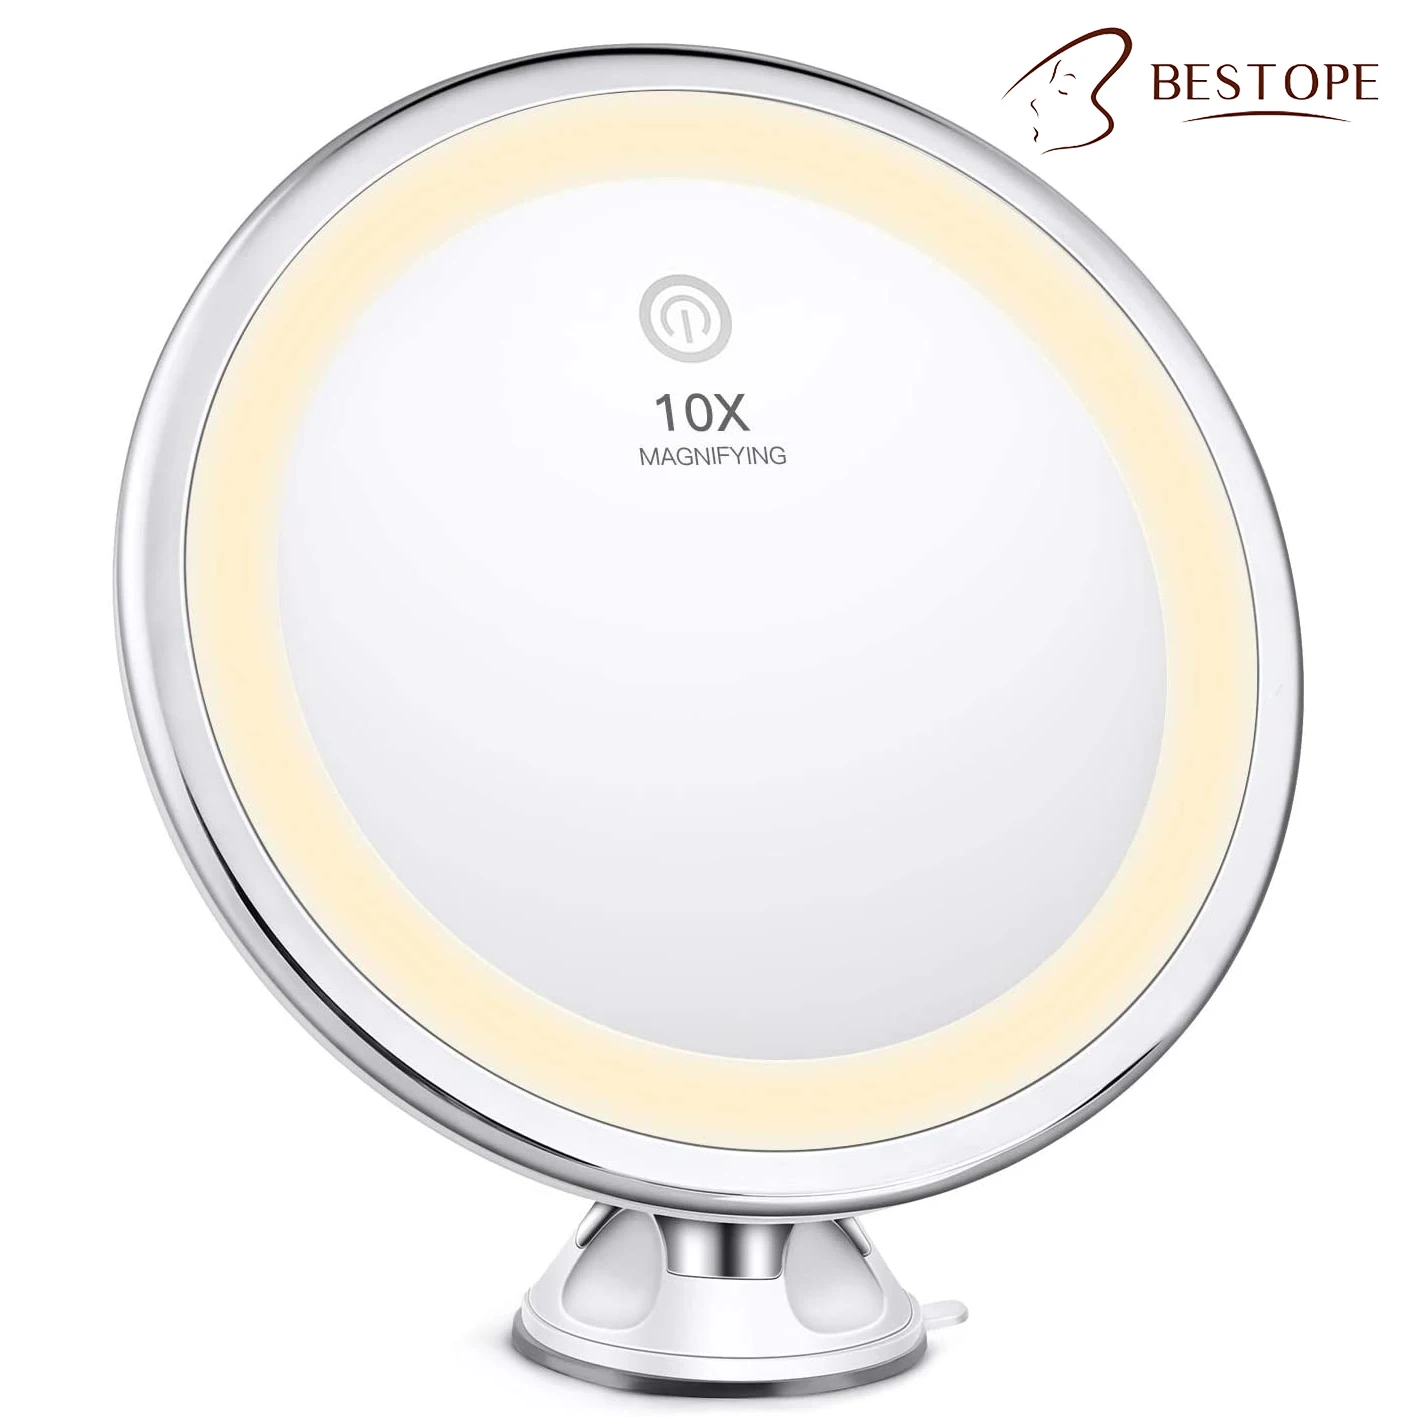 Bestope  3 Color Lighting Modes Intelligent Touch 360 degree Rotation Bathroom LED Suction Cup Mirror 10X  Light Mirror Makeup